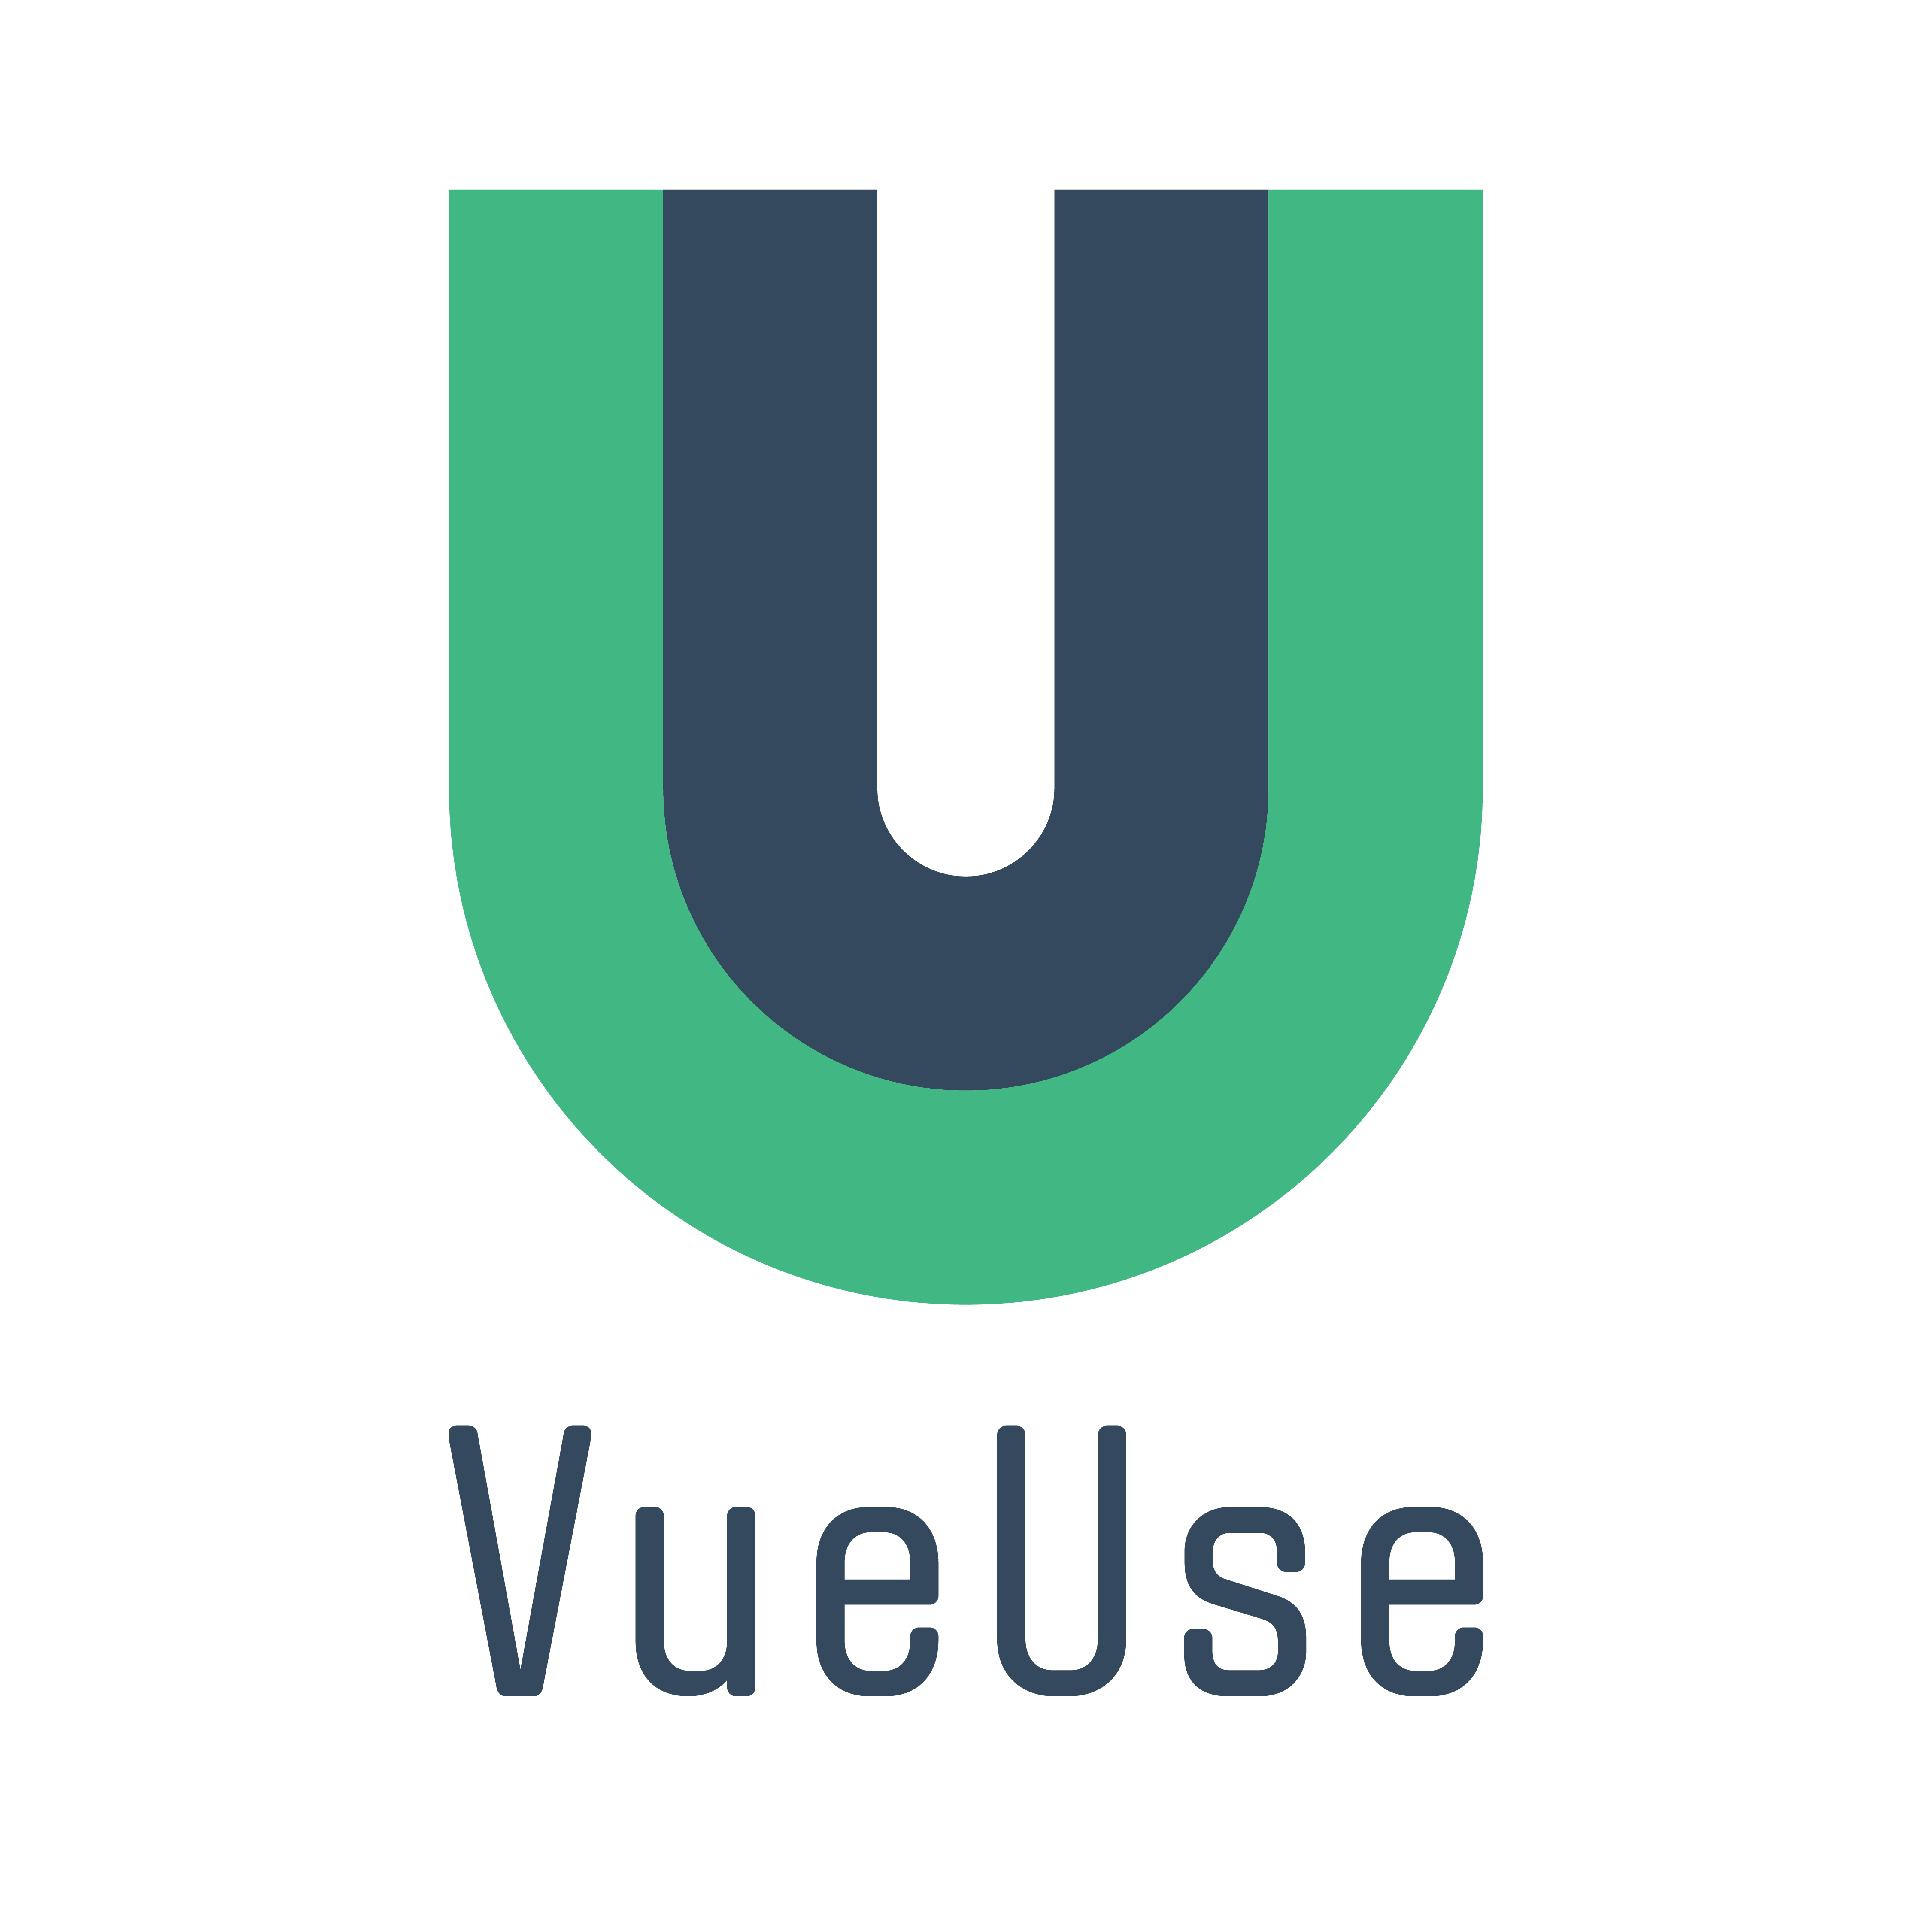 VueUse - Collection of essential Vue Composition Utilities